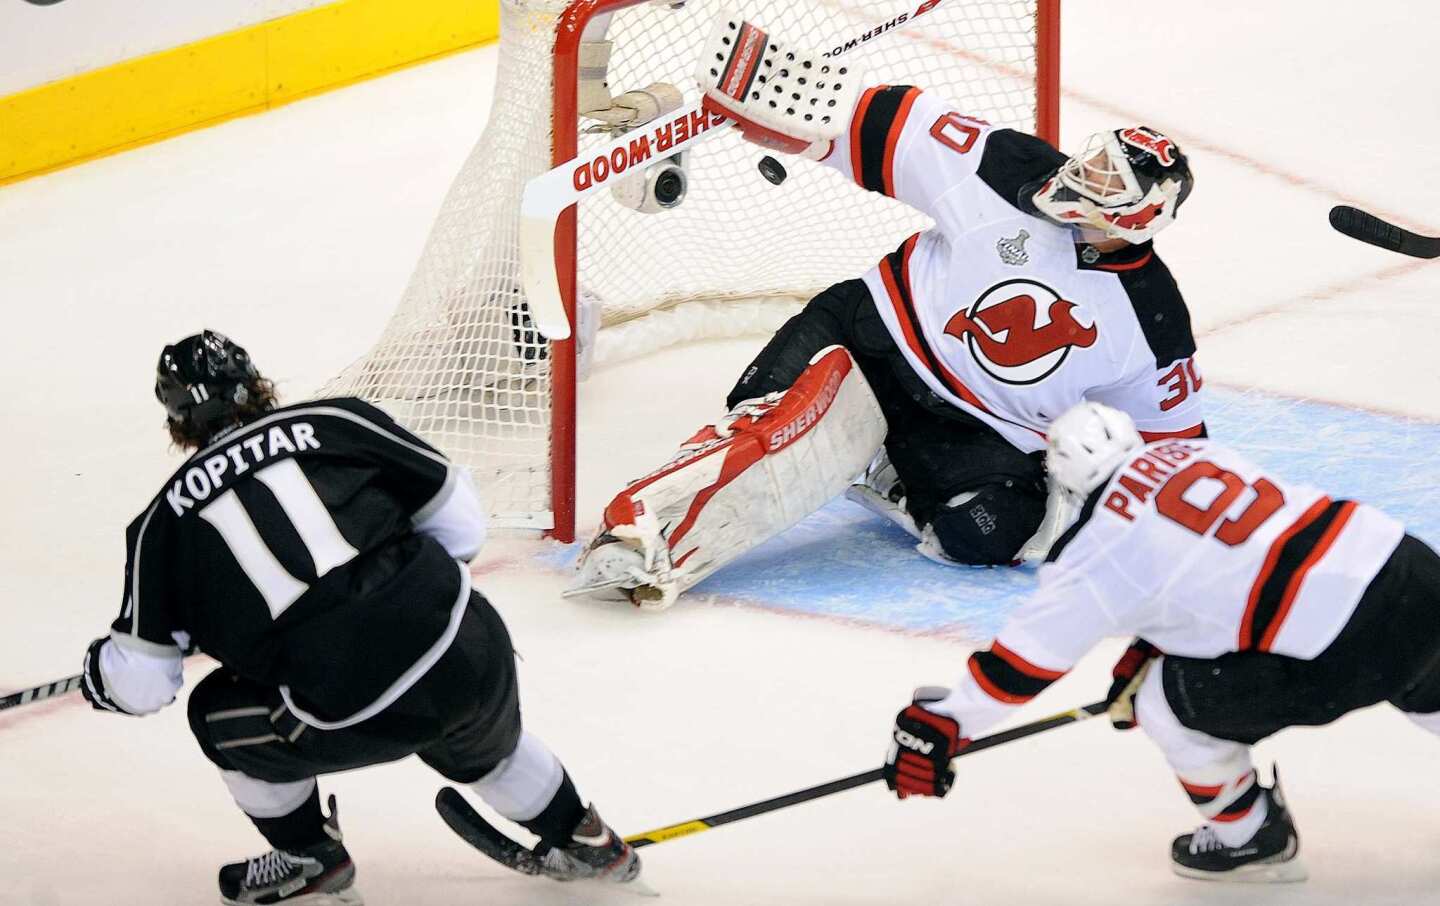 Kings forward Anze Kopitar, left, scores on New Jersey goalie Martin Brodeur during the second period in Game 3 of the Stanley Cup Final at Staples Center.